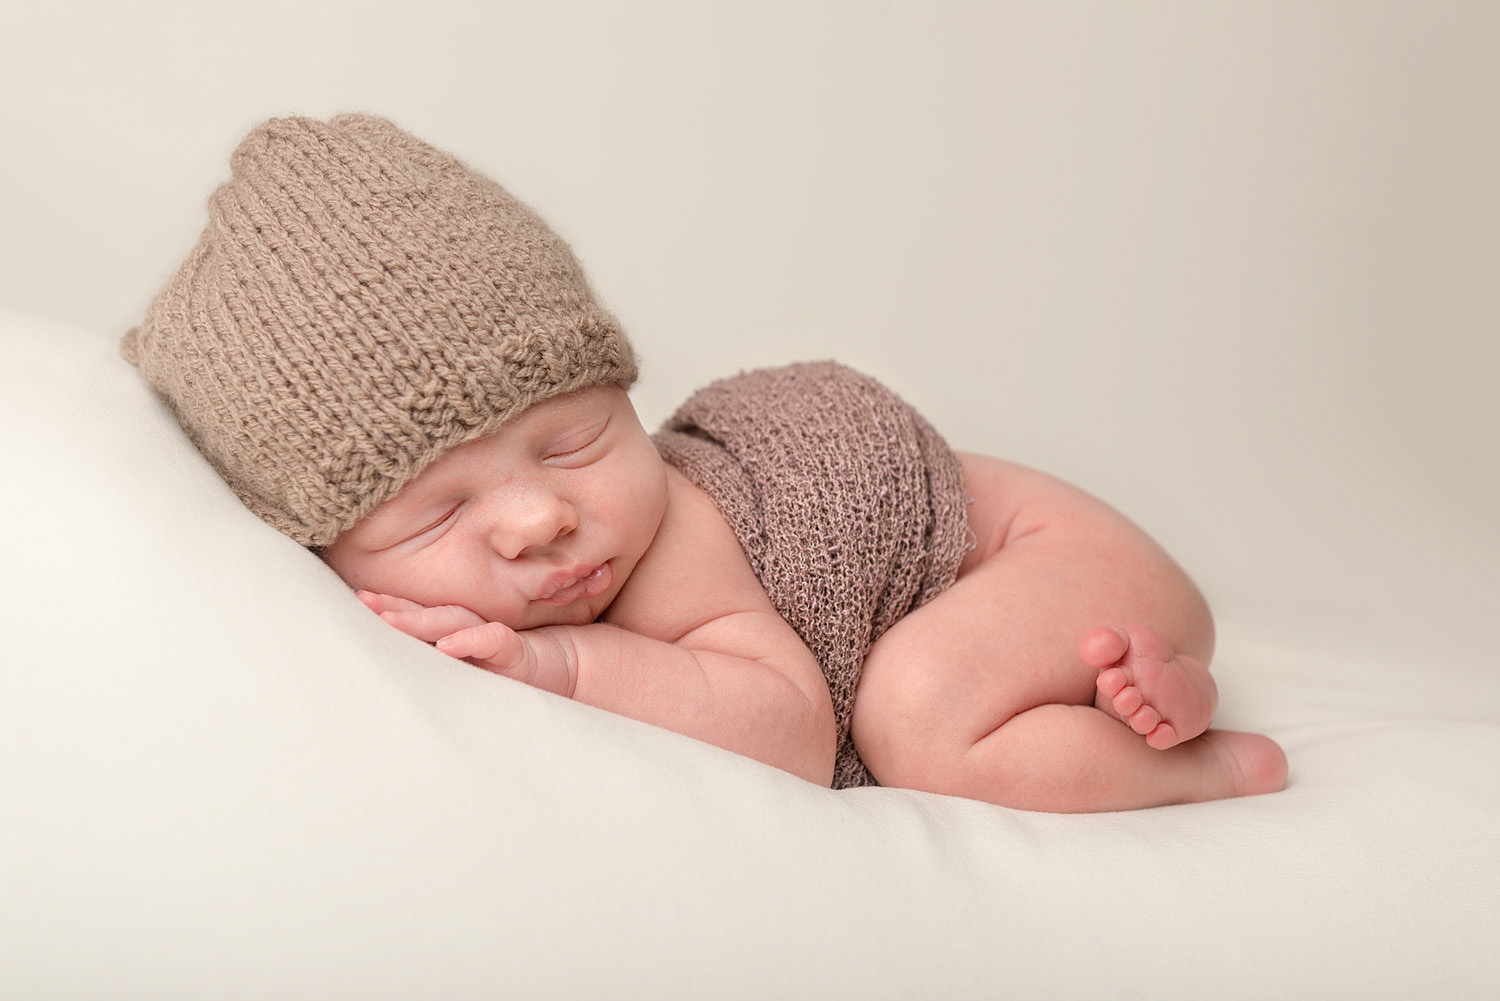 Newborns sleep longer and more deeply between 5 and 10 days old